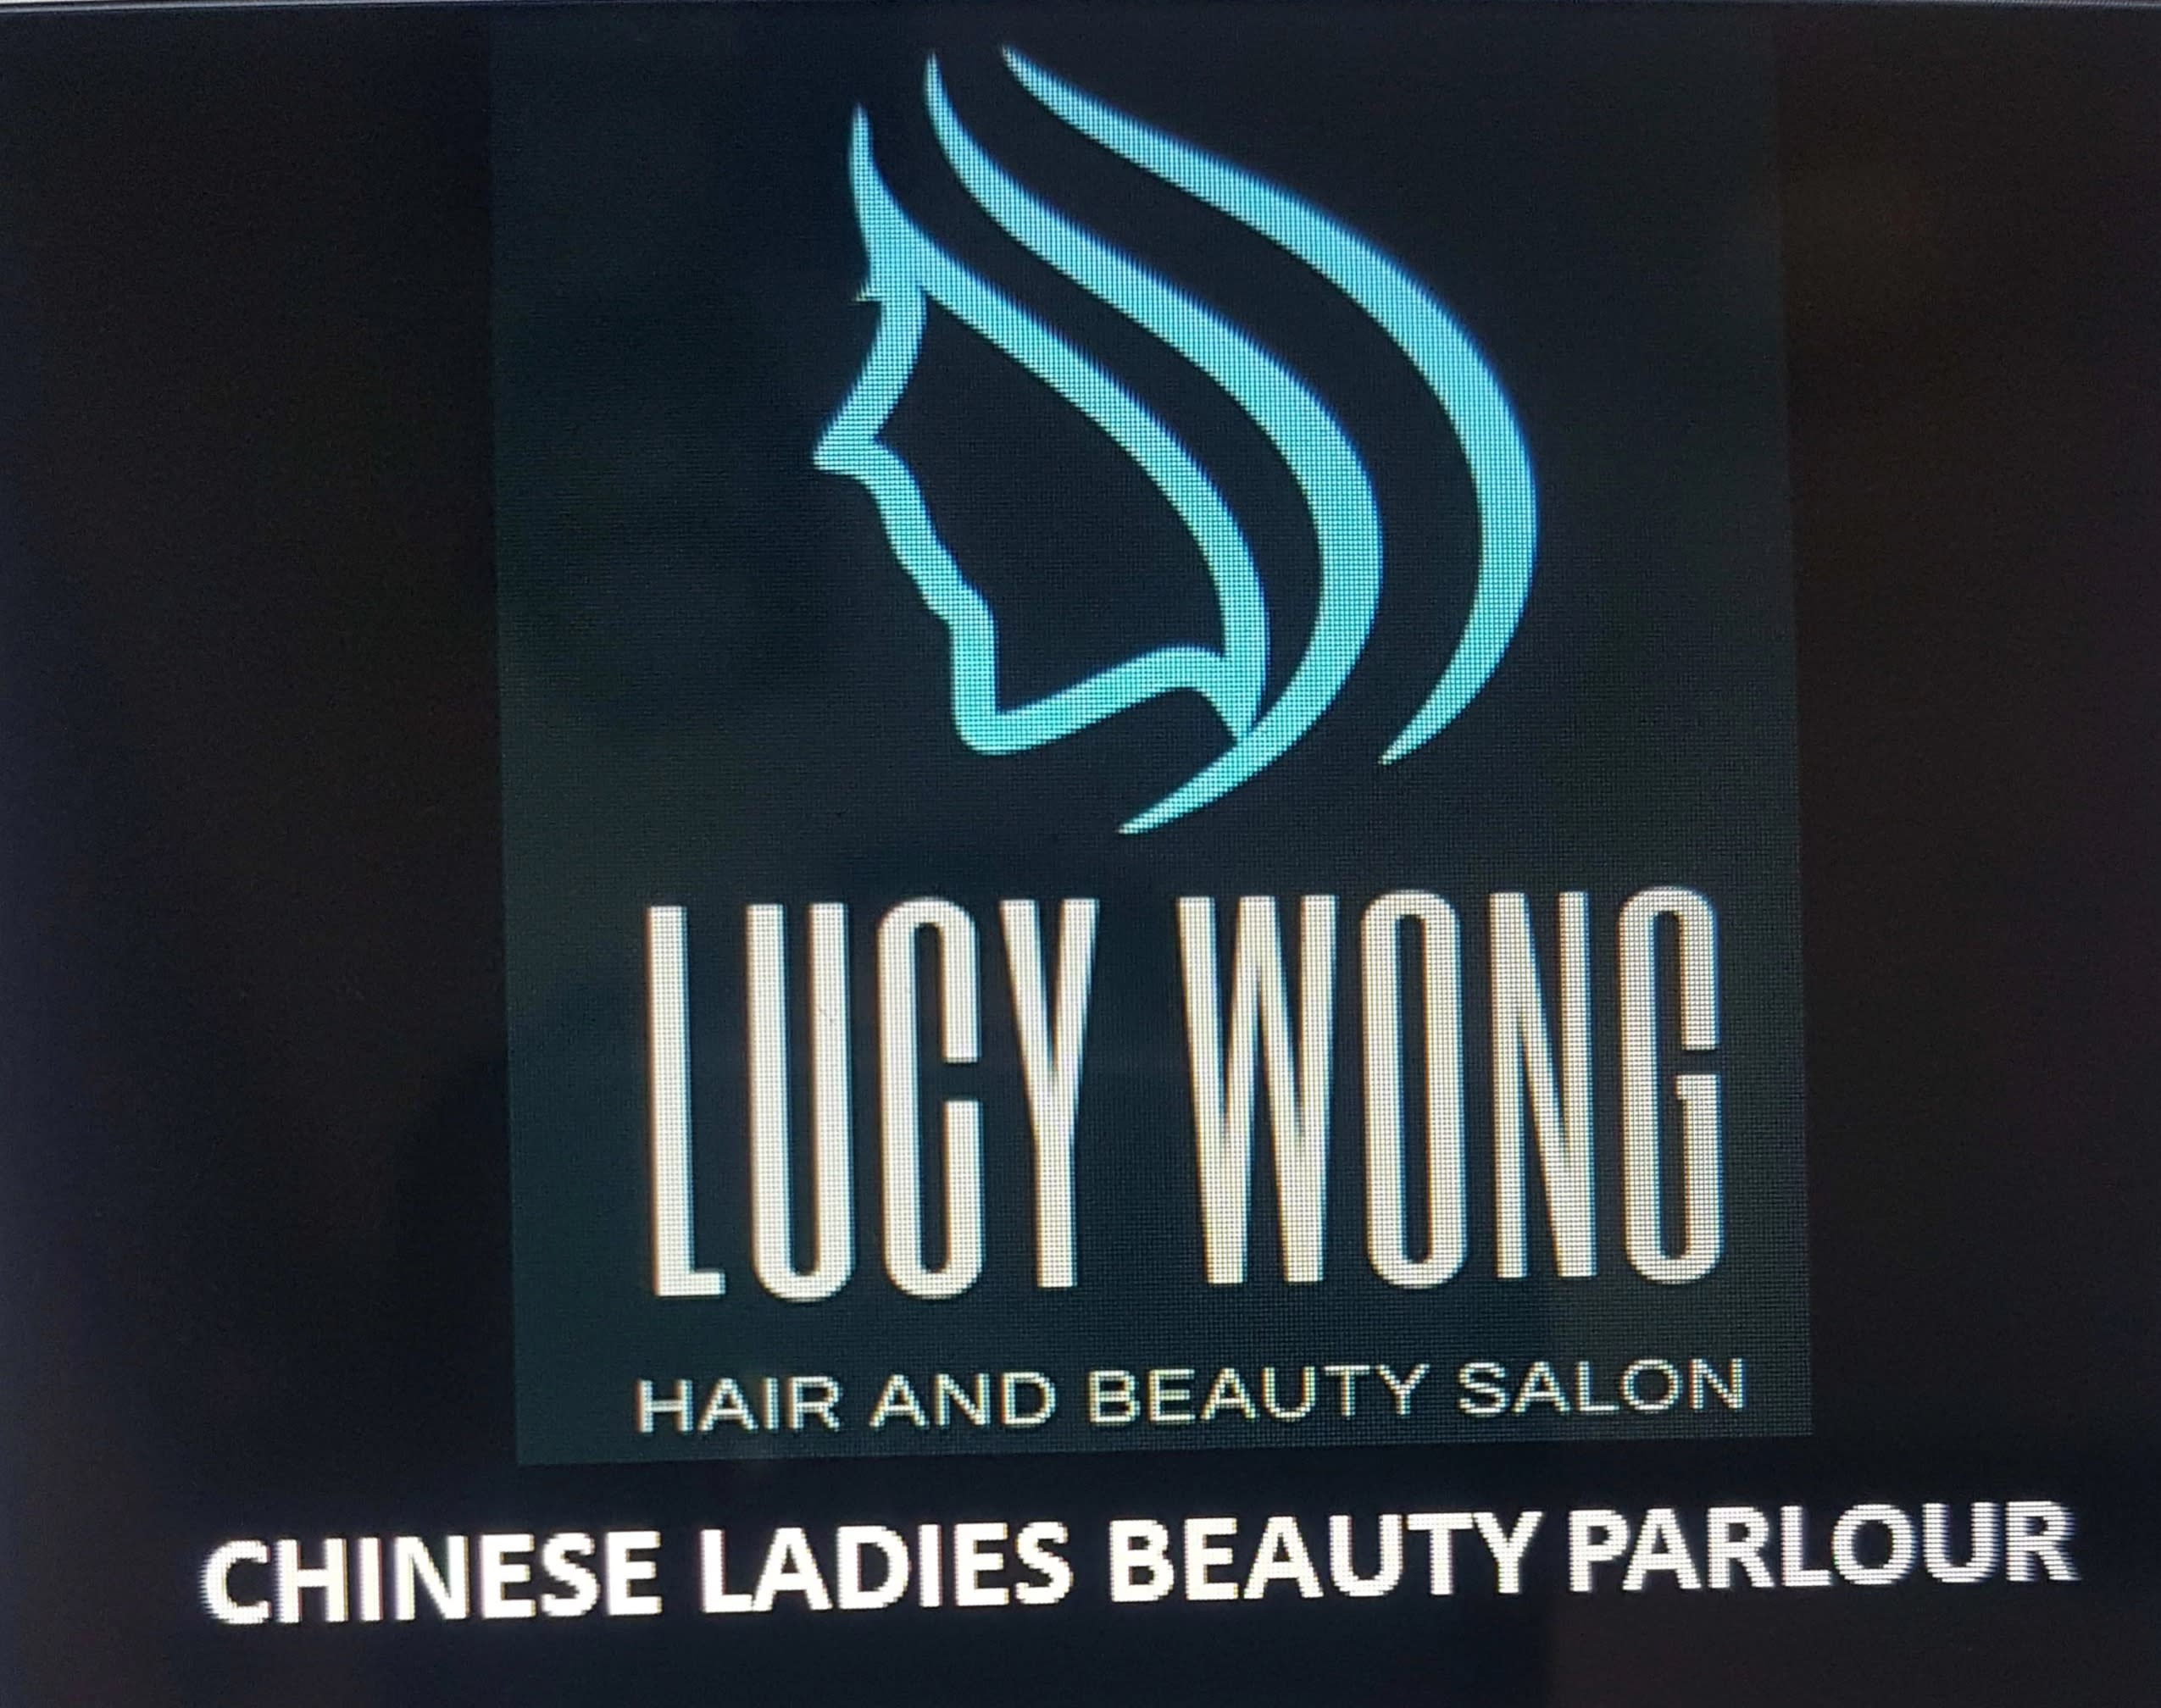 Lucy Wong Hair And Beauty Salon